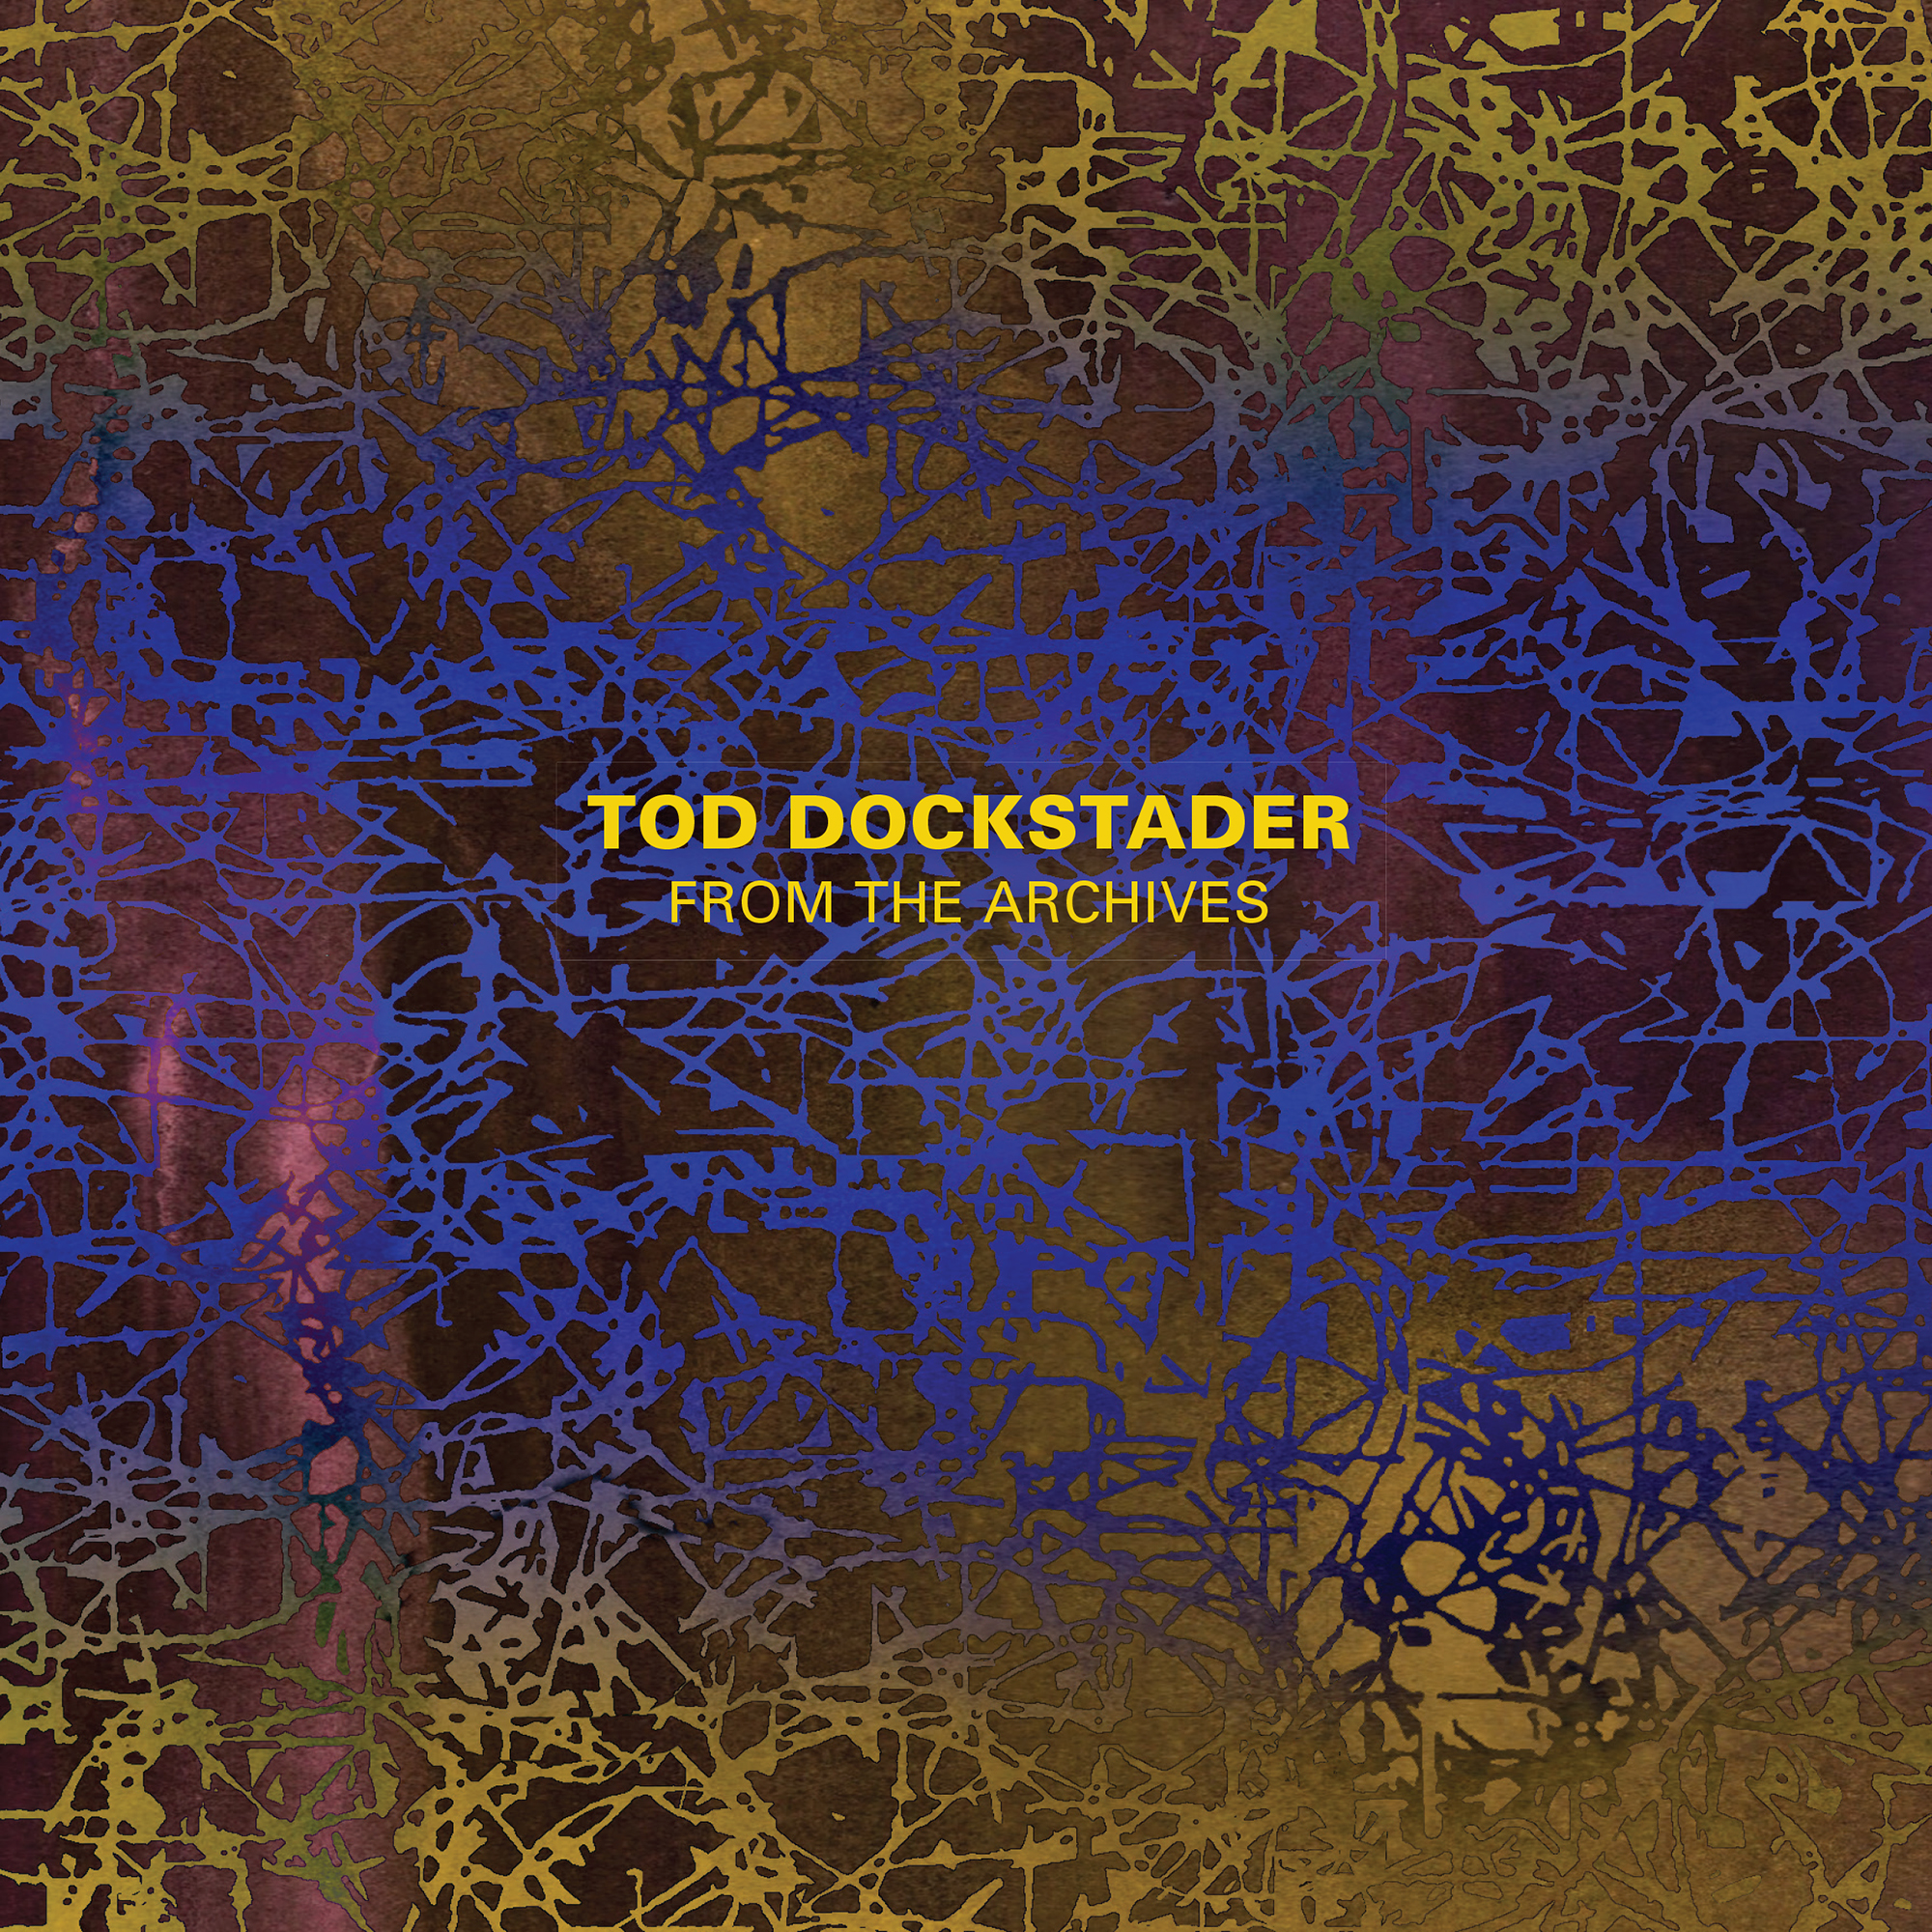 The cover for the latest Starkland CD release, Tod Dockstader From The Archives.